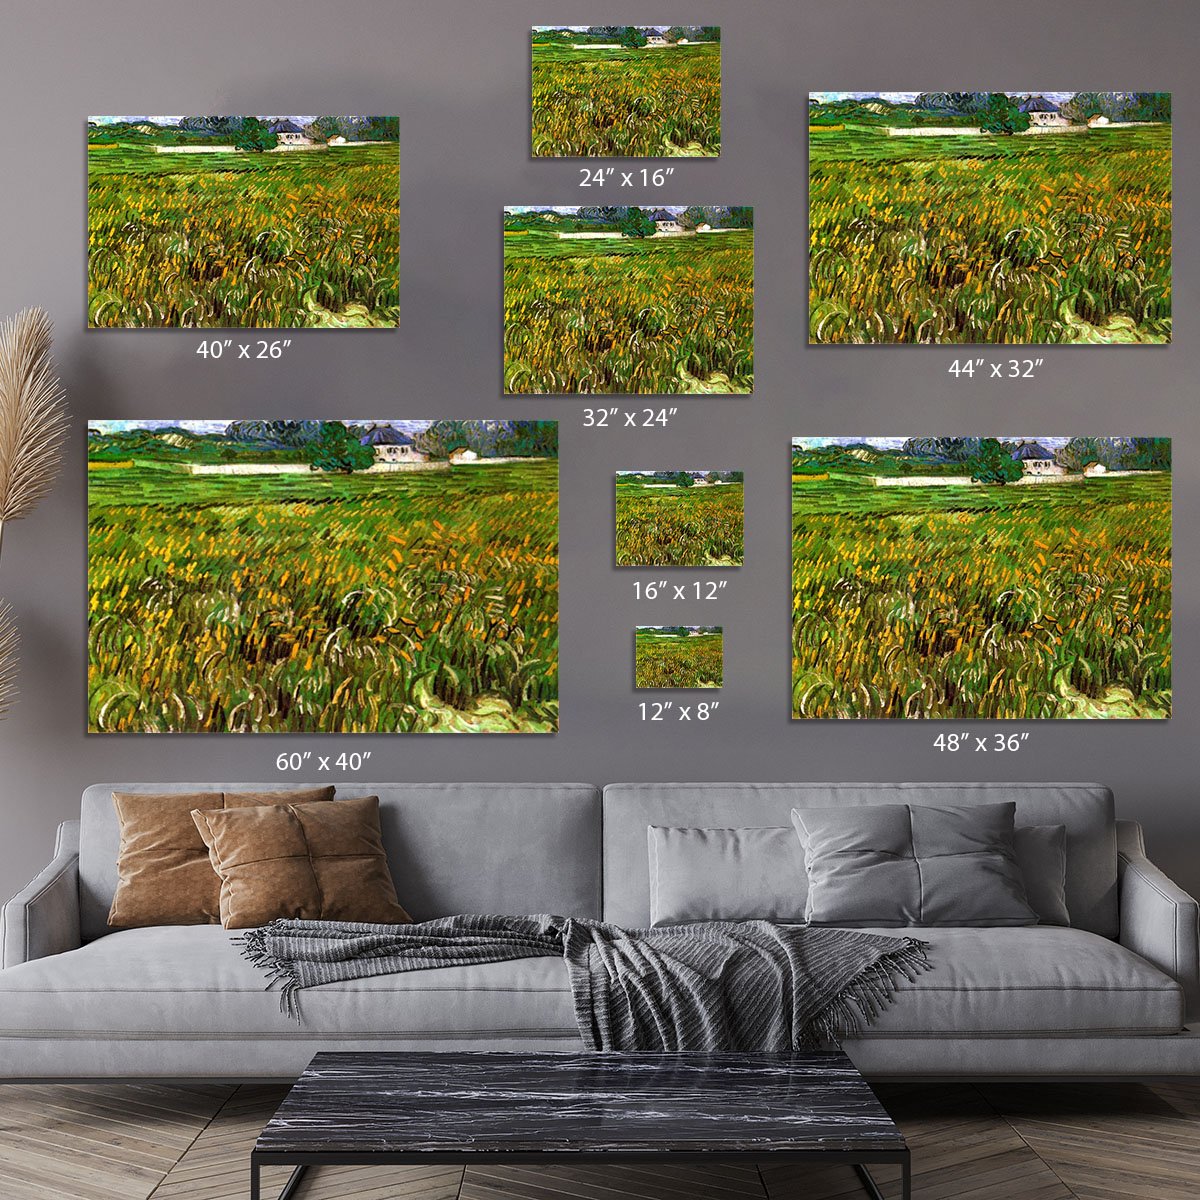 Wheat Field at Auvers with White House by Van Gogh Canvas Print or Poster